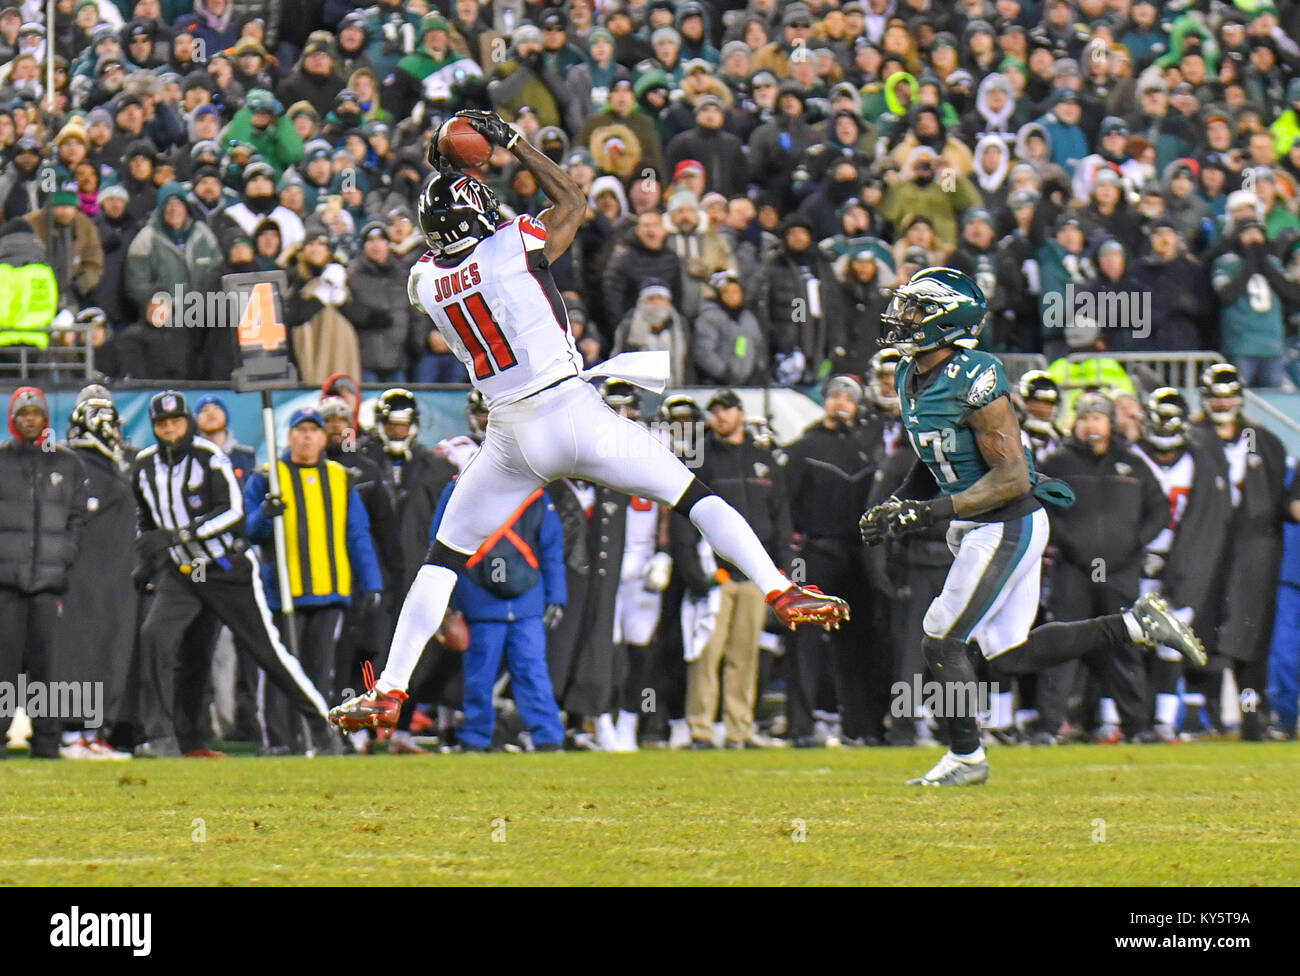 Philadelphia, Pennsylvania, USA. 13th Jan, 2018. Julio Jones (11) of the Atlanta Falcons makes a catch during the NFC Divisional Playoff game against the Philadelphia Eagles at Lincoln Financial Field in Philadelphia, Pennsylvania. Gregory Vasil/Cal Sport Media/Alamy Live News Stock Photo